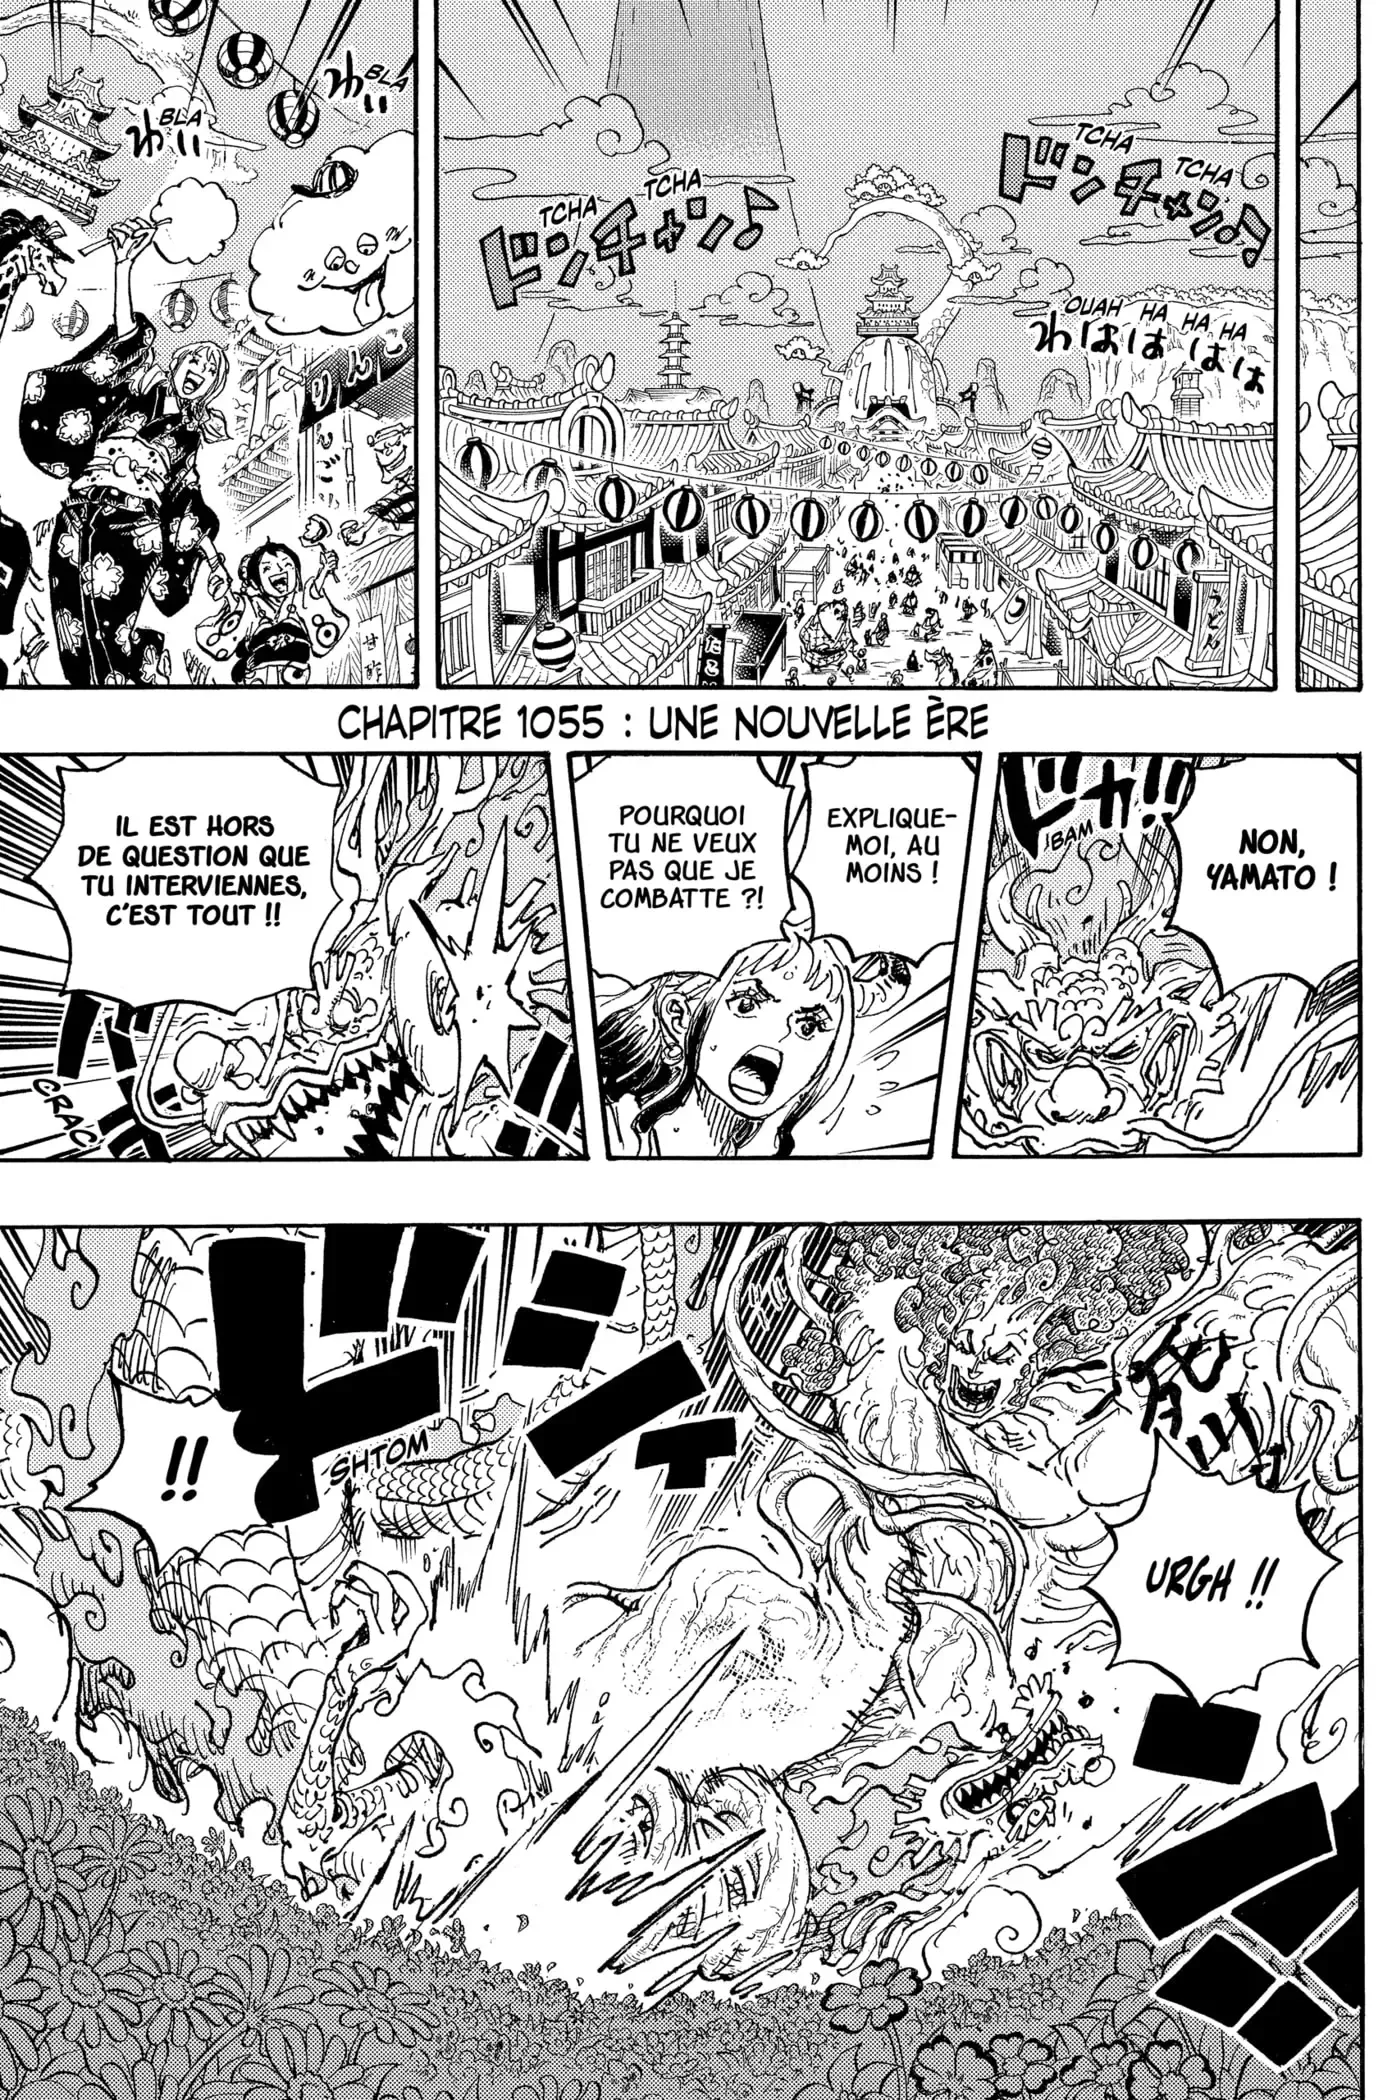 One Piece: Chapter chapitre-1055 - Page 1